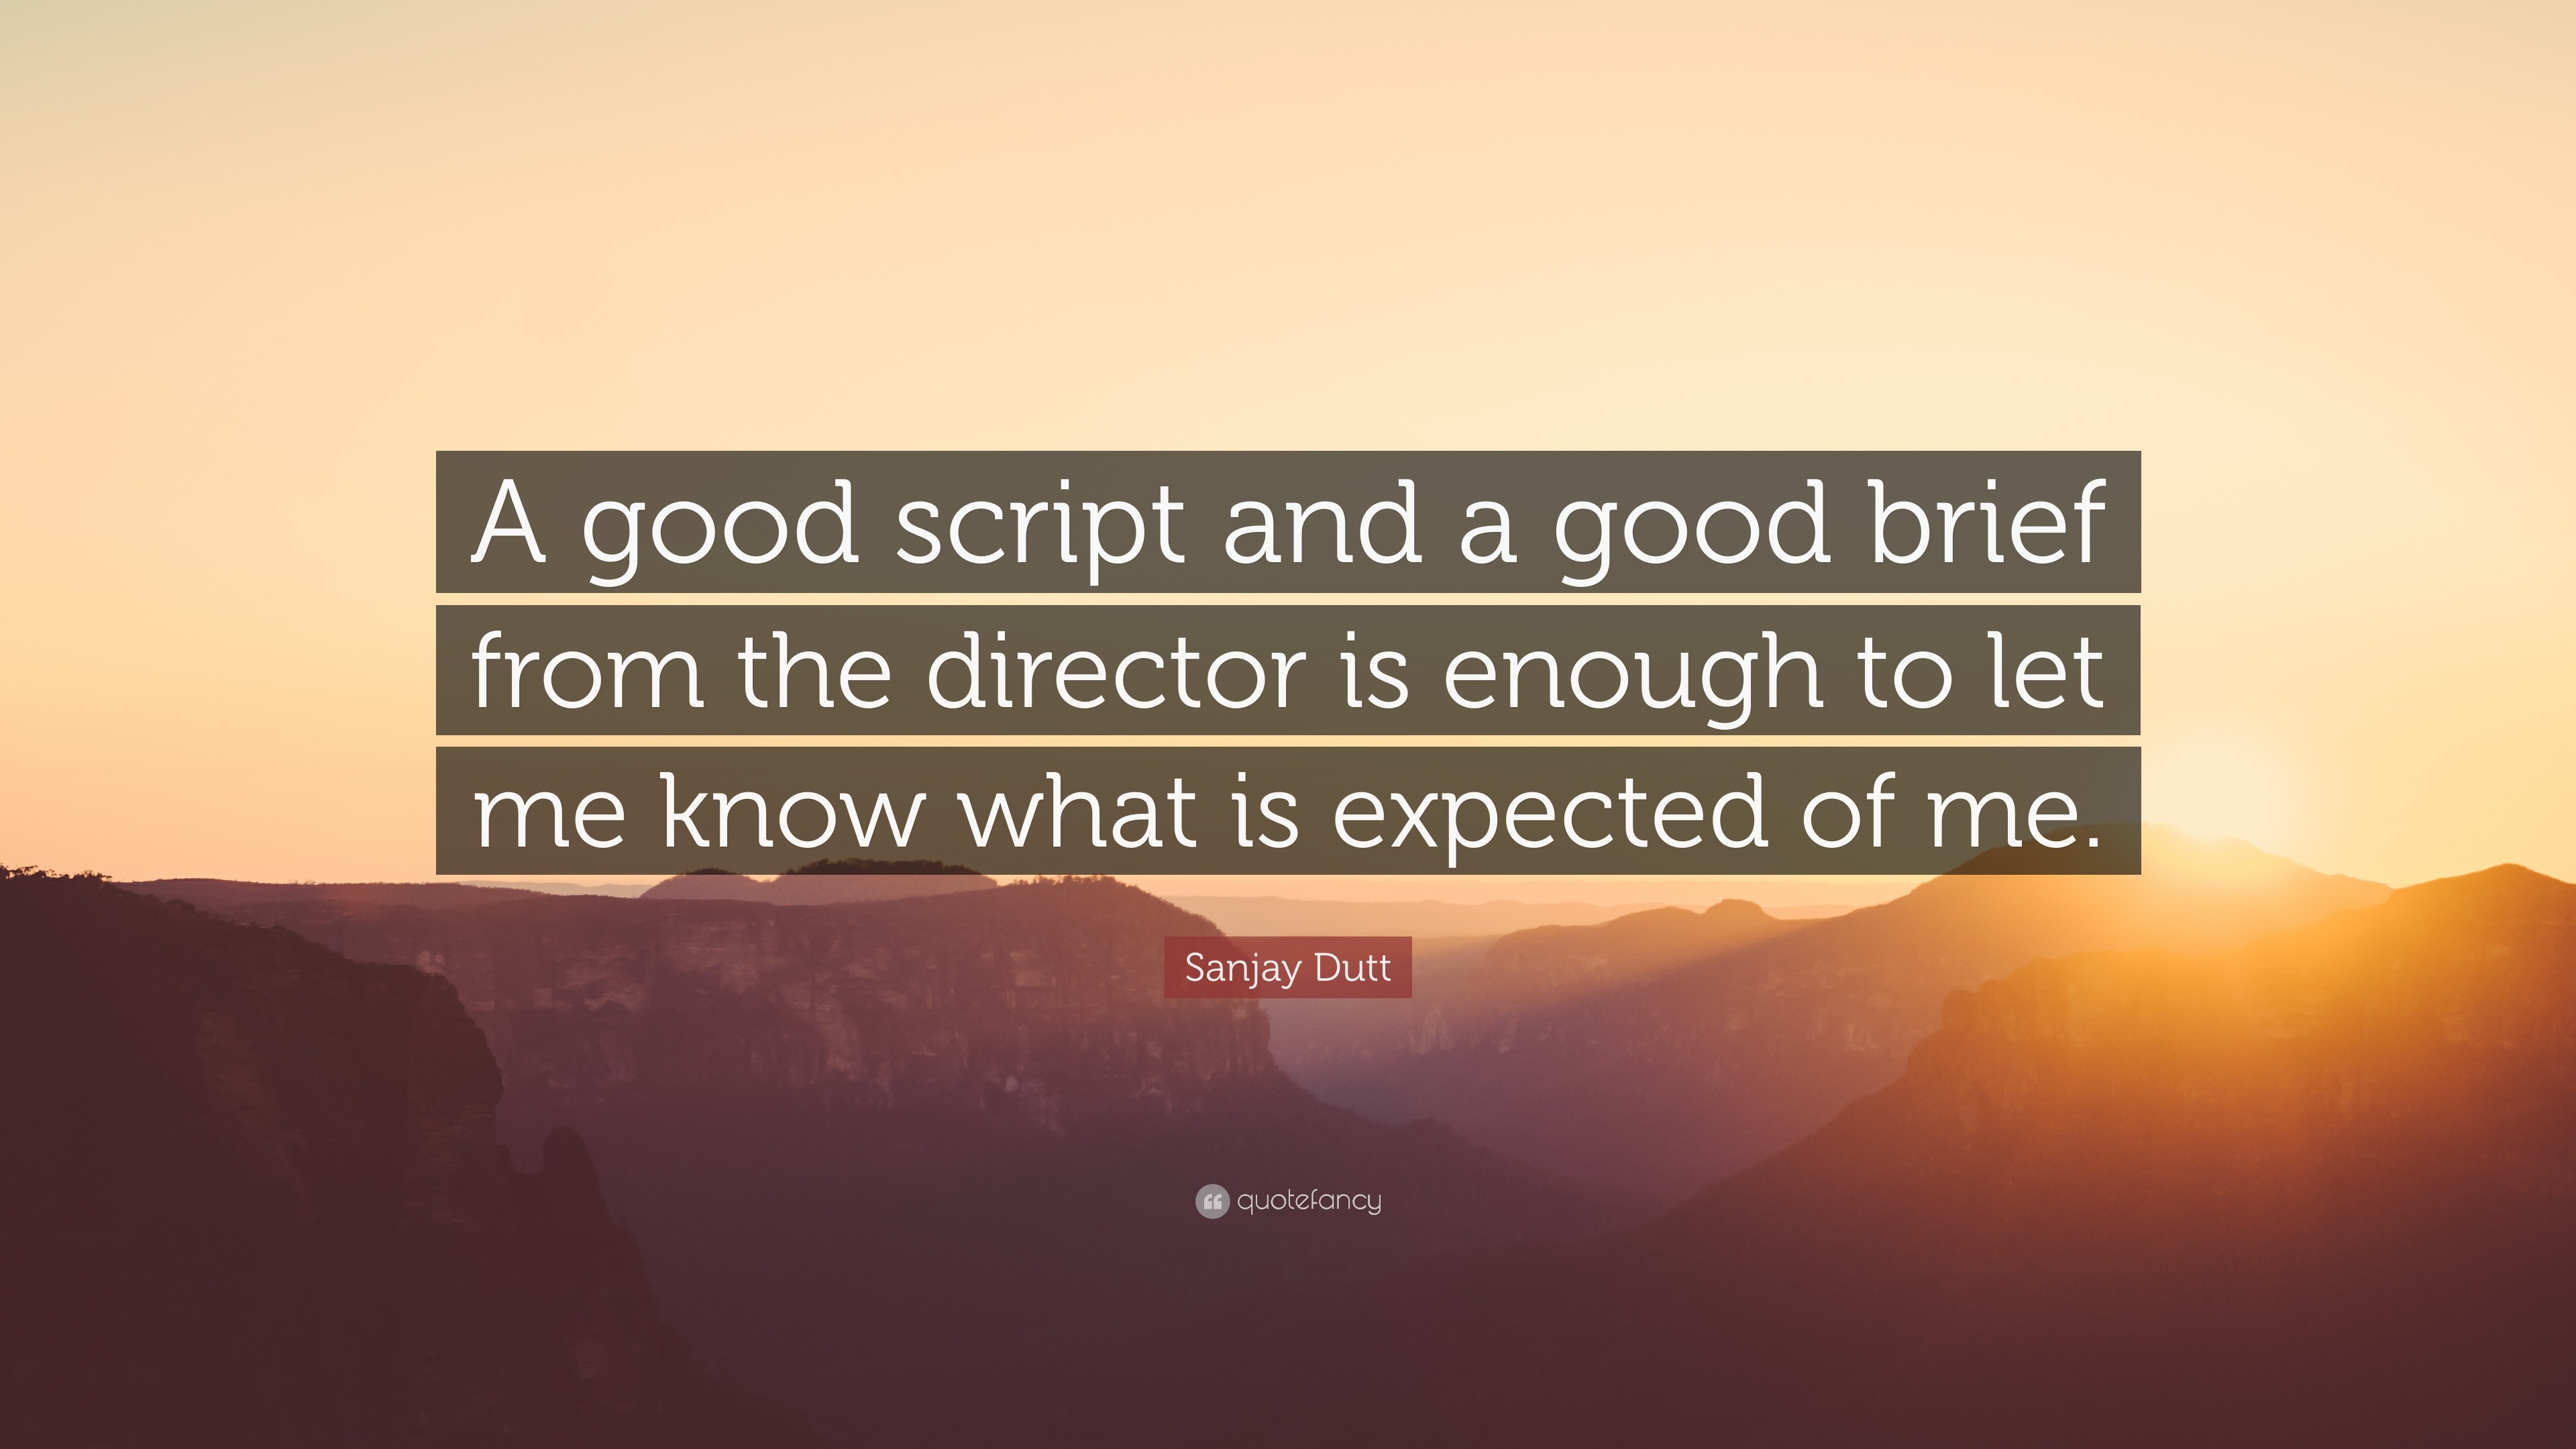 https://quotefancy.com/media/wallpaper/3840x2160/1437432-Sanjay-Dutt-Quote-A-good-script-and-a-good-brief-from-the-director.jpg